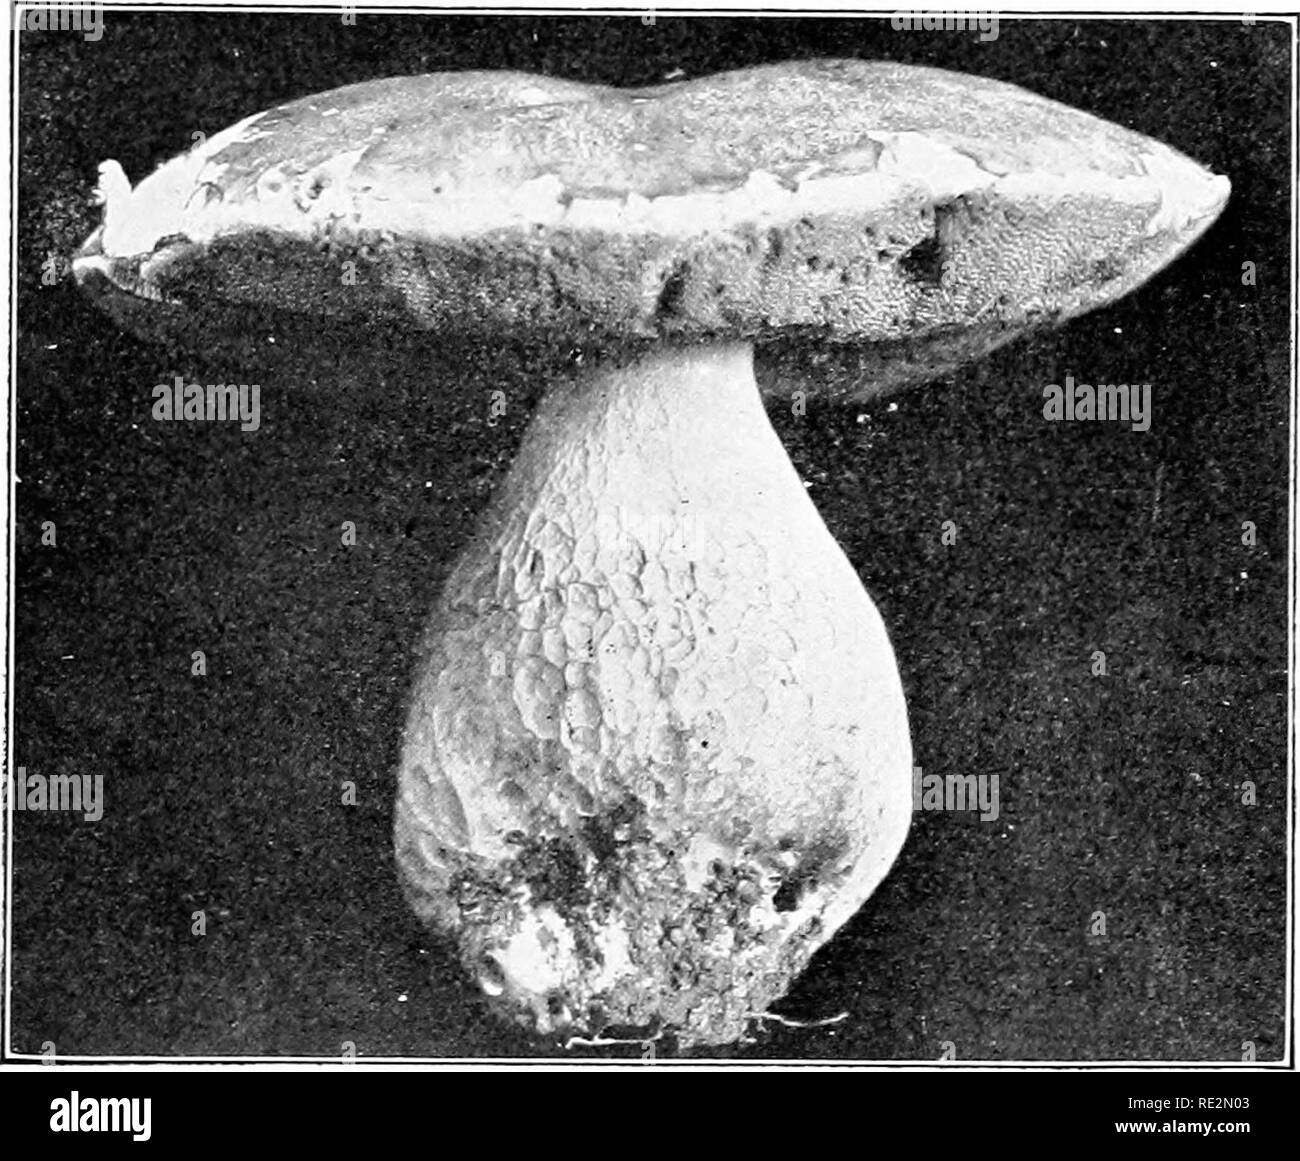 . Elementary botany. Botany. FUXGT: MUSHROOMS. 209 426. Tube-bearing fungi (Polyporacese).âIn the tube-bearing fungi, the fruiting surface, instead of lying o-er the .surface of gills, lines the surface of tubes or pores on the under side of the cap. The fruit-bearing portion therefore is &quot;honey-combed.&quot; The sulphur poh-porus (IjlyporuÂ» sulphu- reus) illustrates one form. The tube-bearing fungi are sometimes called &quot;bracket&quot; fungi, or &quot;shelf&quot; fungi, becau.se the pileus is attached to the. Fig. 24.S. Edible Boletus. Eoletiis edulis. Fruiting siirface honey-combe Stock Photo